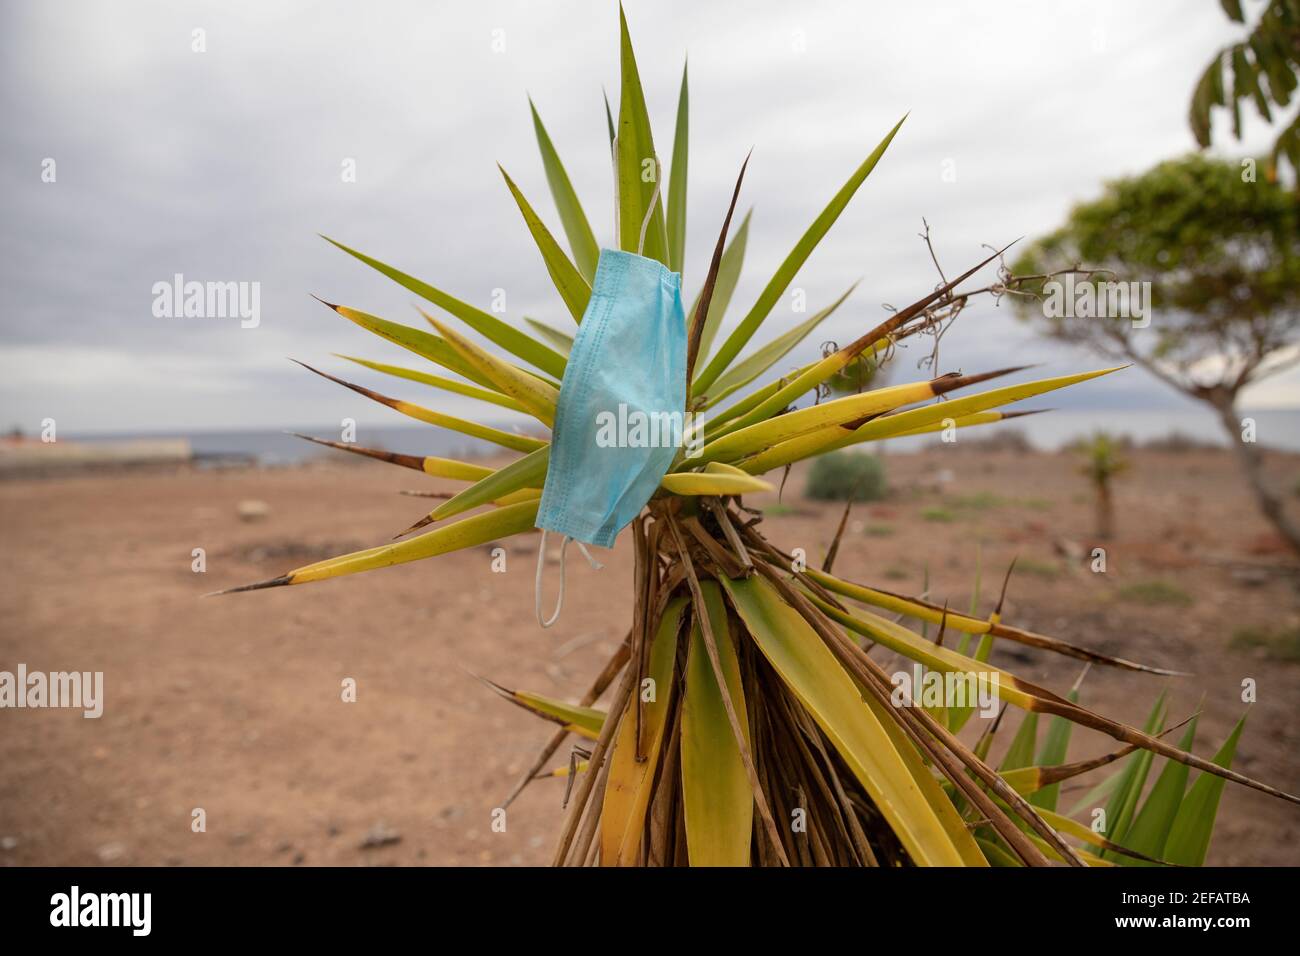 Littered mask during the coronavirus pandemic.  Used mask (in Tenerife, Canary Islands) left on a cactus becomes garbage Stock Photo